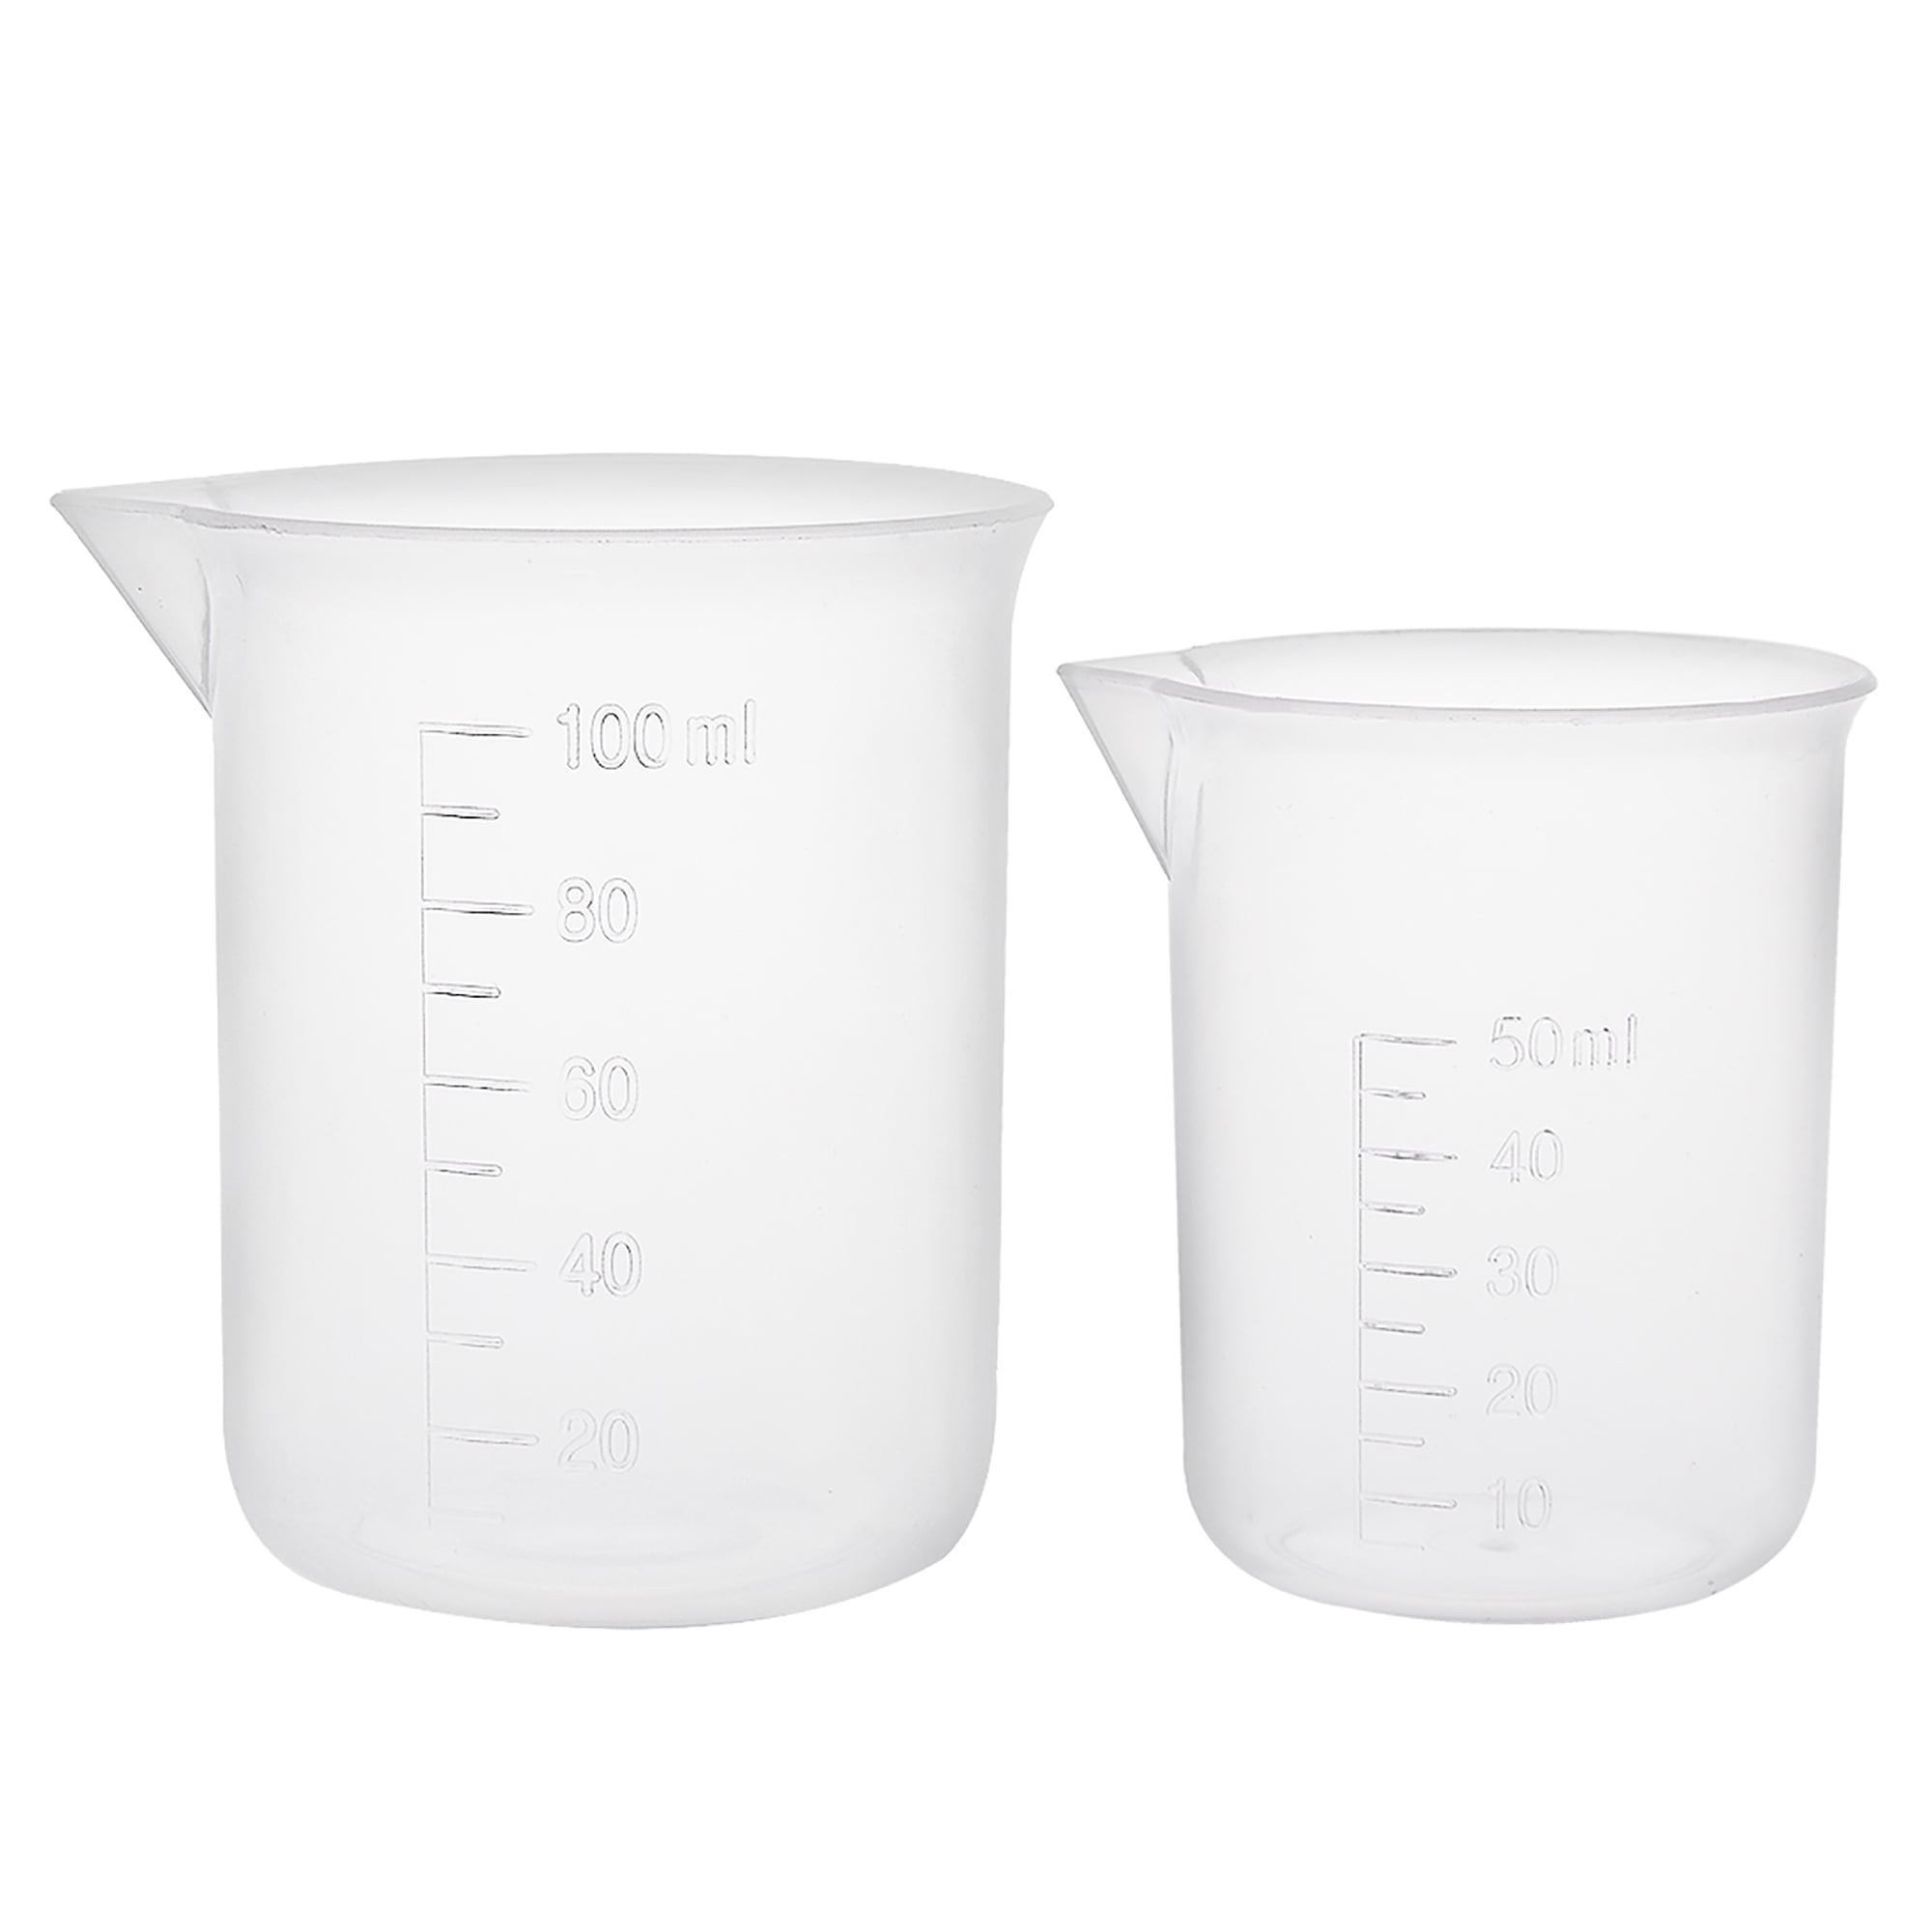 5oz (150ml) Graduated Plastic Measuring Cups 100 Cups 25 Mixing Sticks —  TCP Global